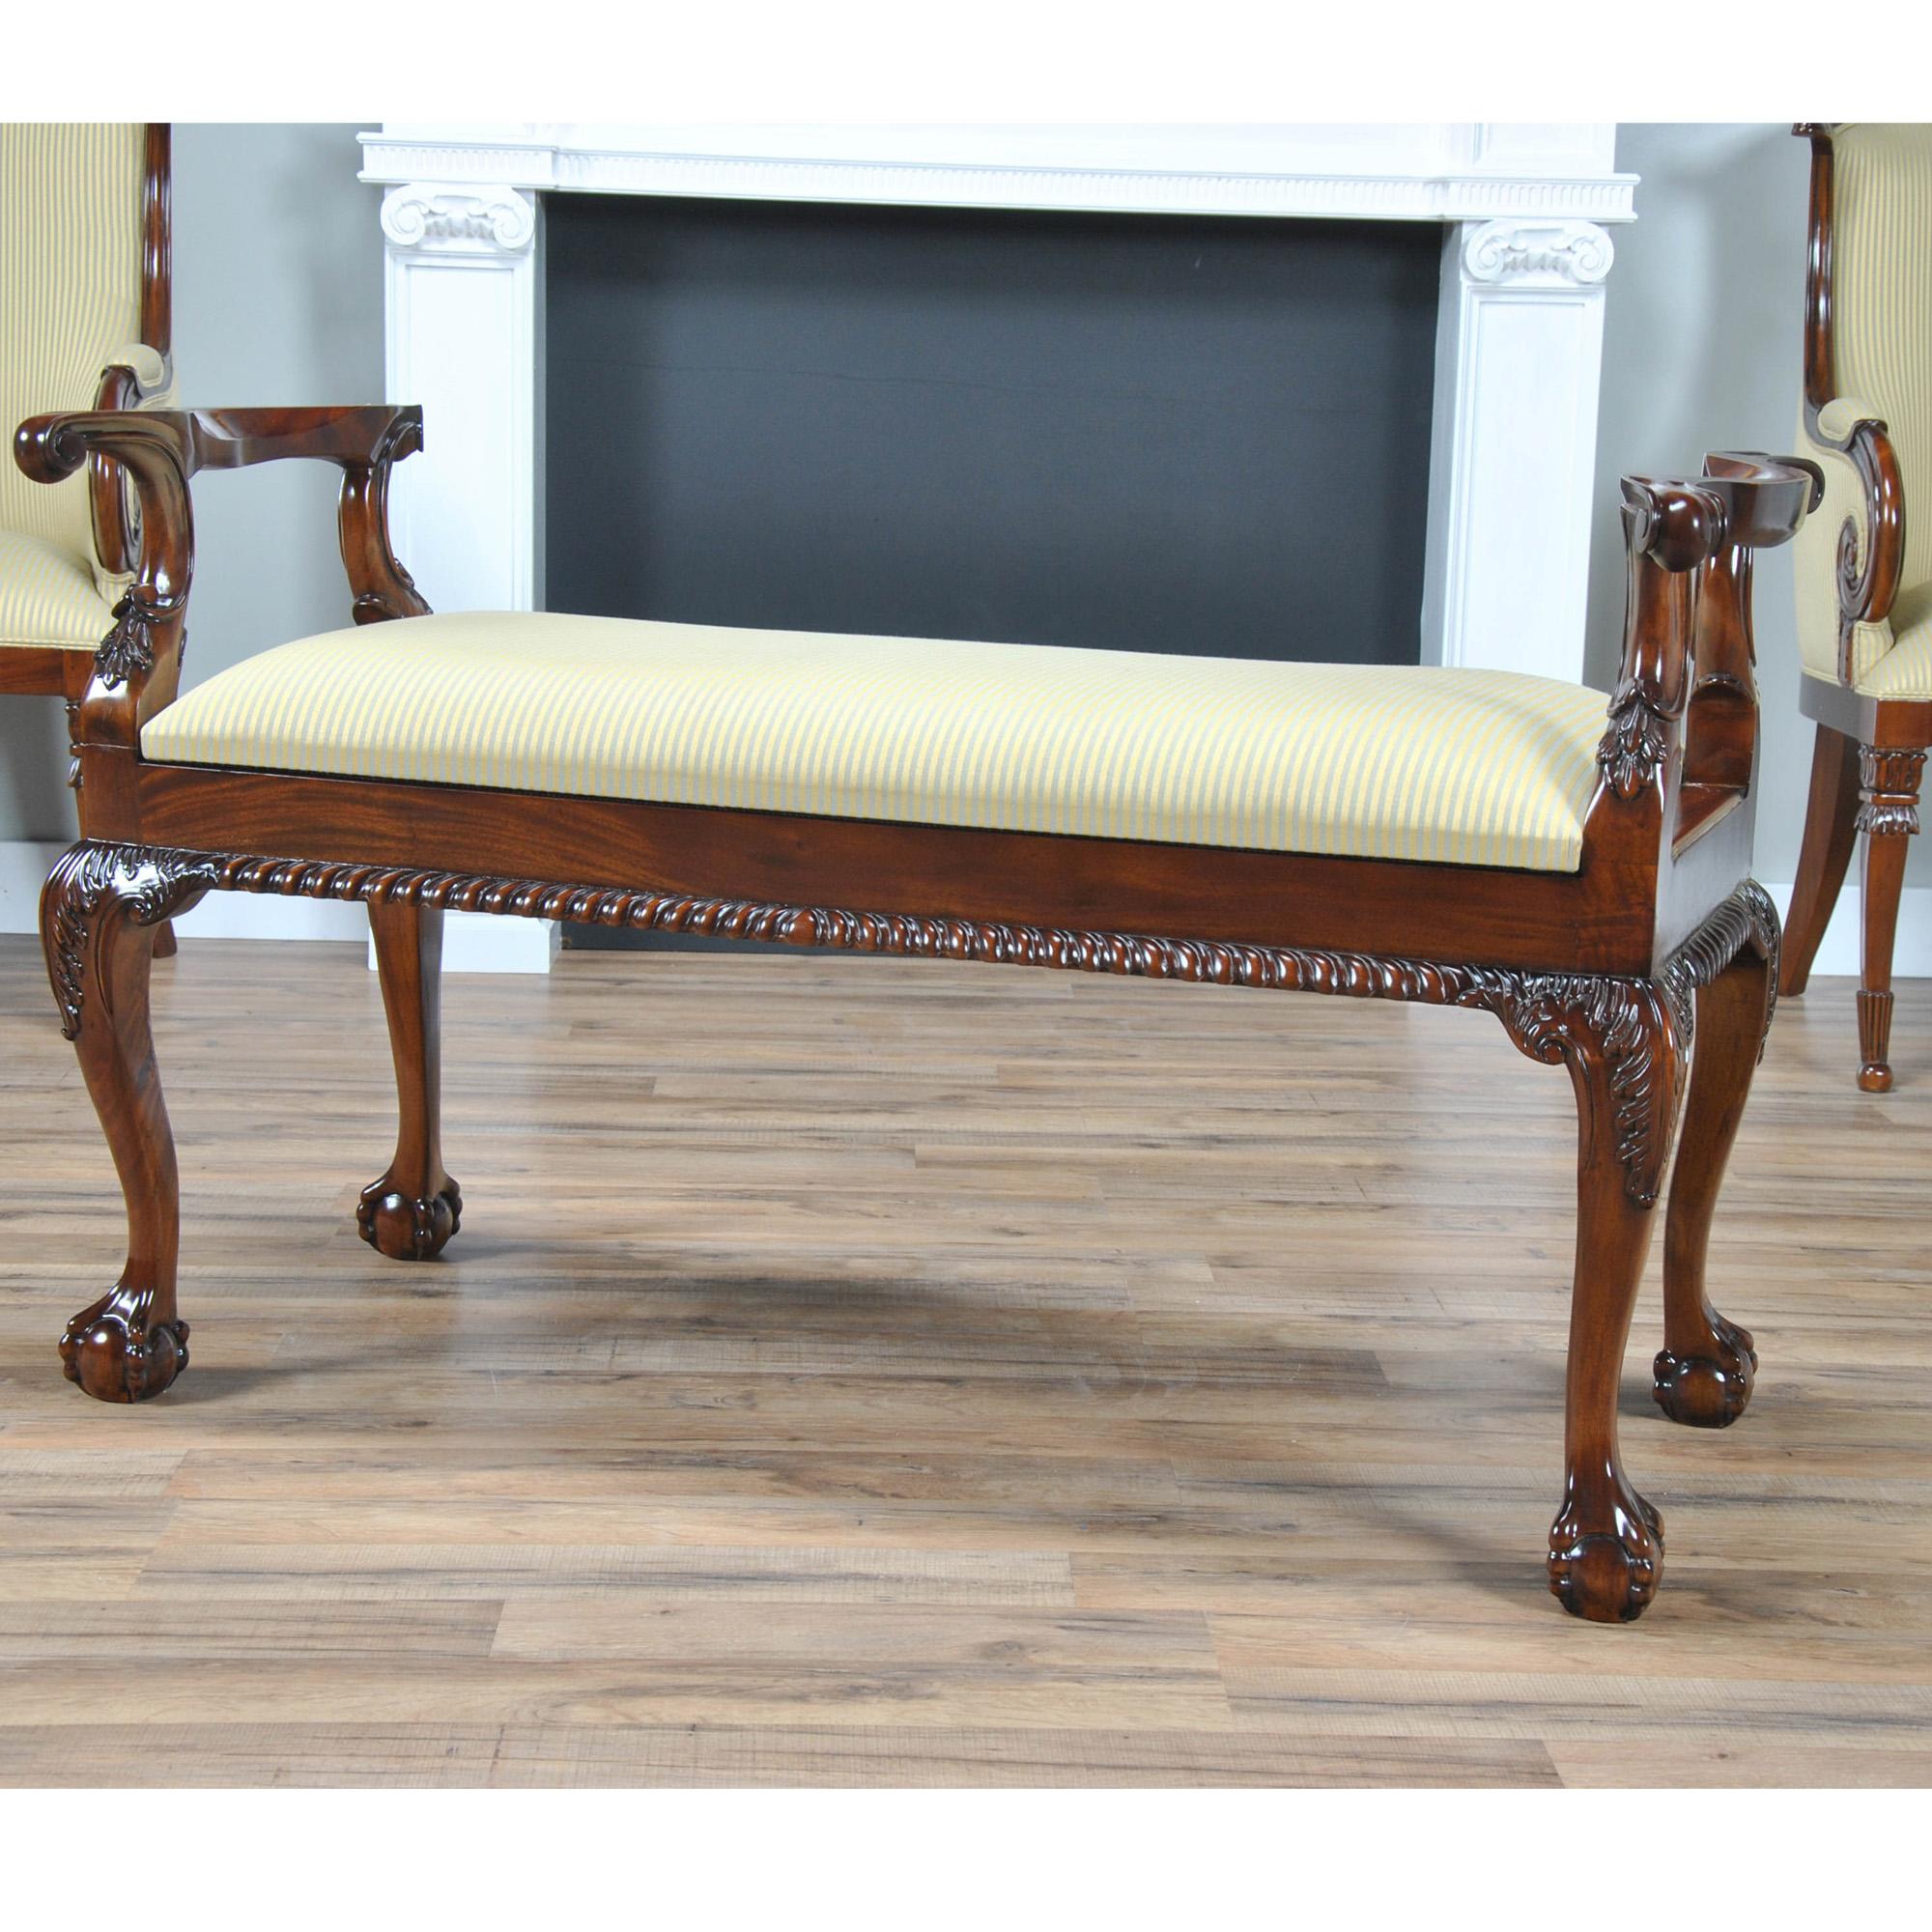 A Mahogany Piano Bench is produced from solid mahogany with hand carved details all the way from the scrolled arms to the gadrooned (rope edged) skirt and on downwards to the cabriole legs which feature acanthus carvings as well as ball and claw